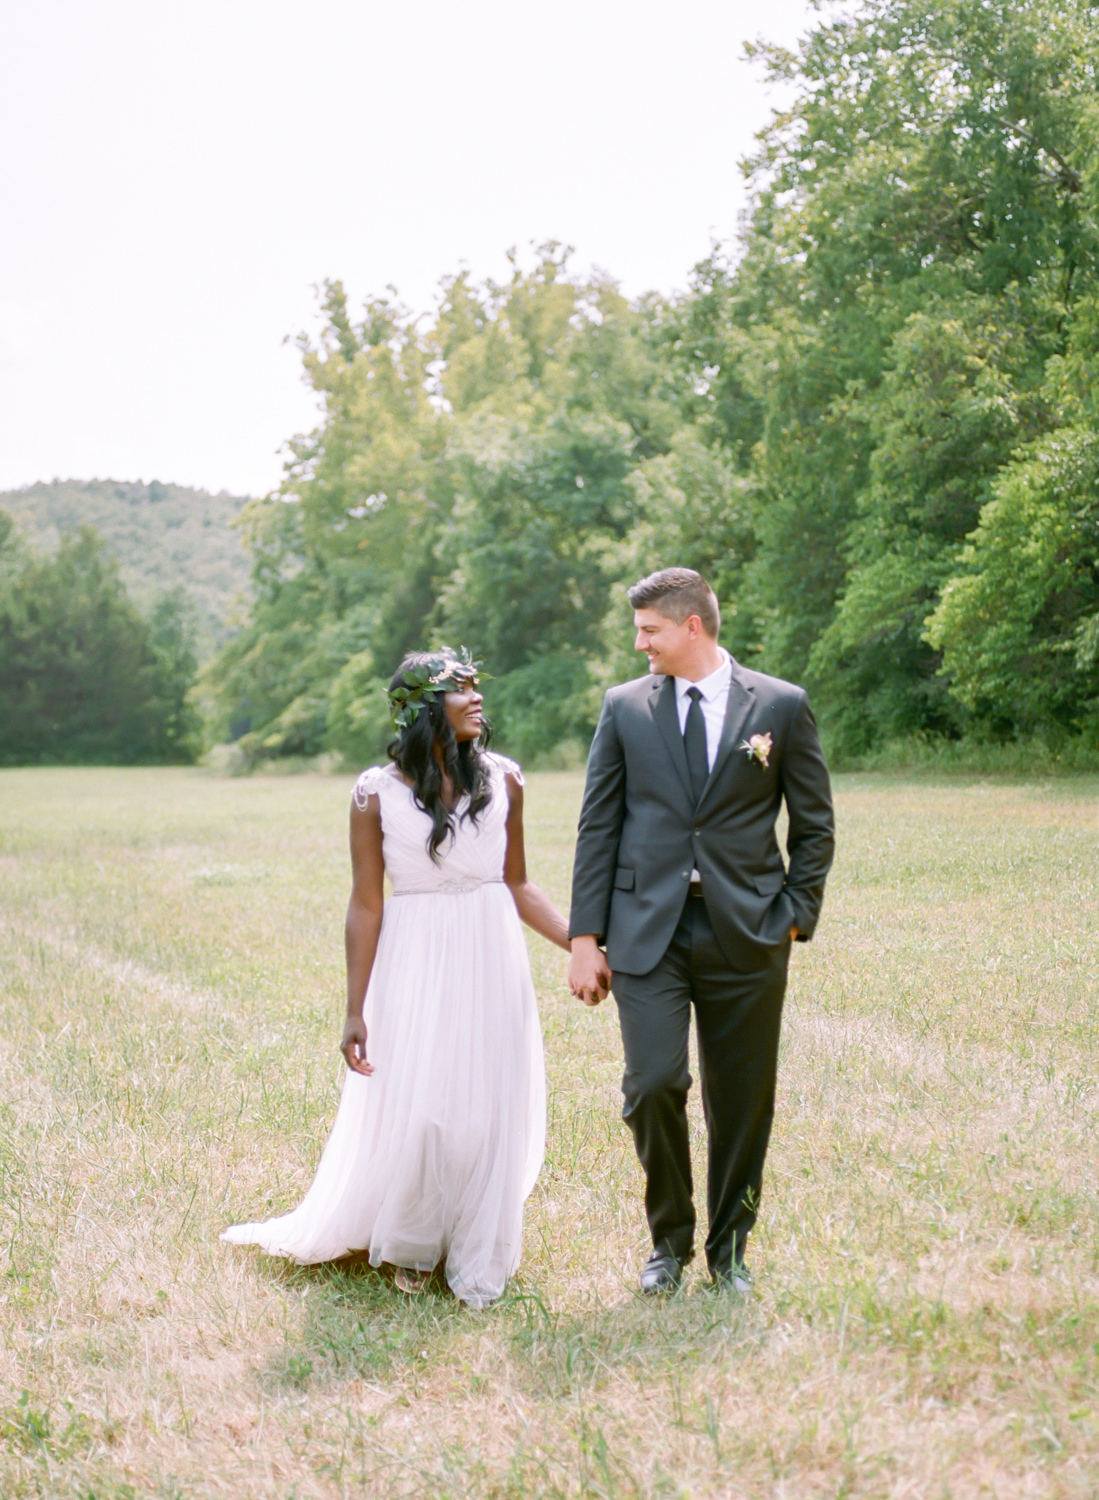 bride in grecian and leaf crown, groom in dark suit walking and holding hands, Erica Robnett Photography